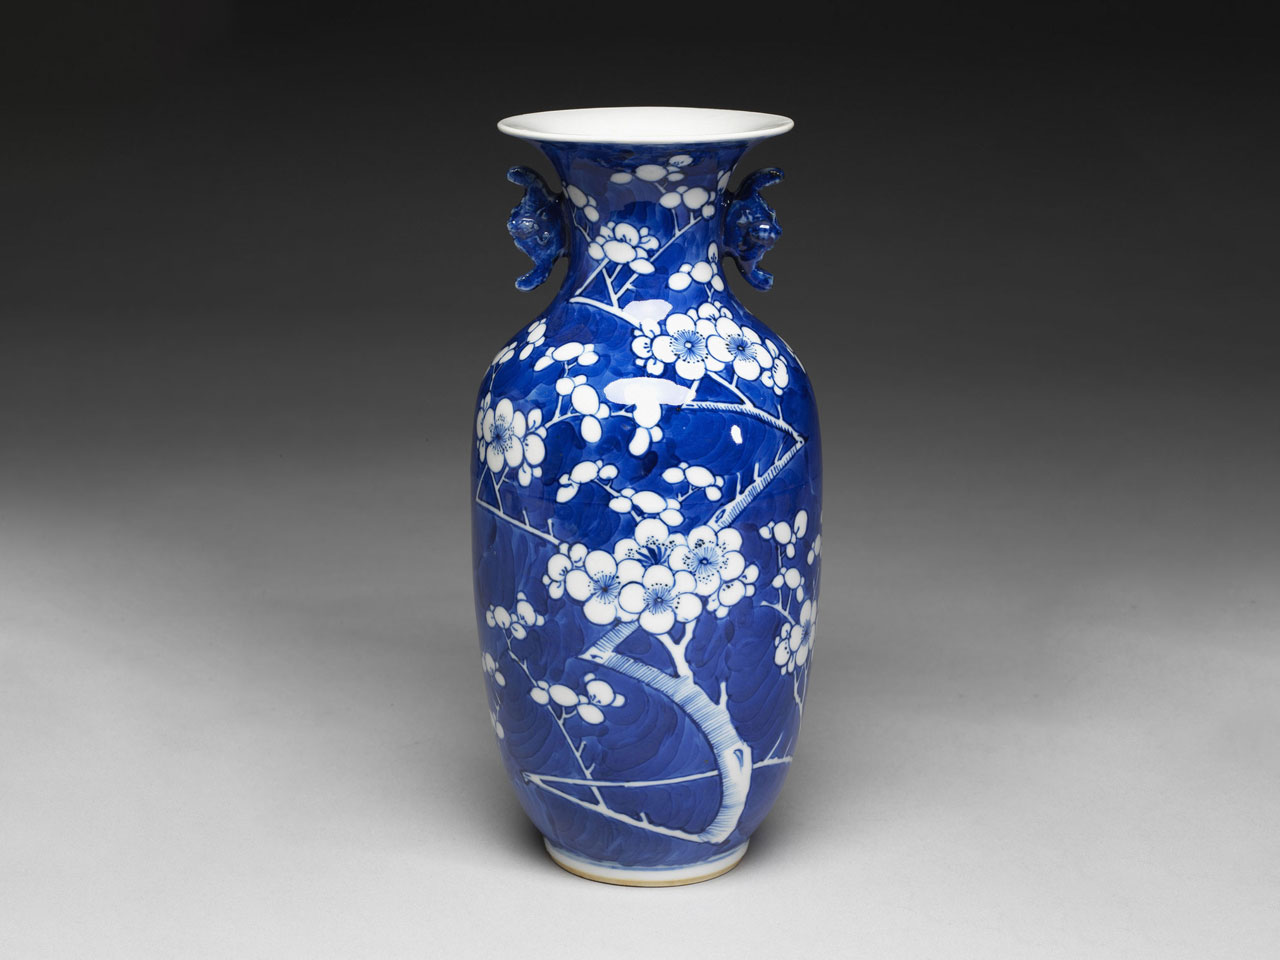 Vase with bat-shaped handles and white plum-blossom decoration on a blue glaze ground